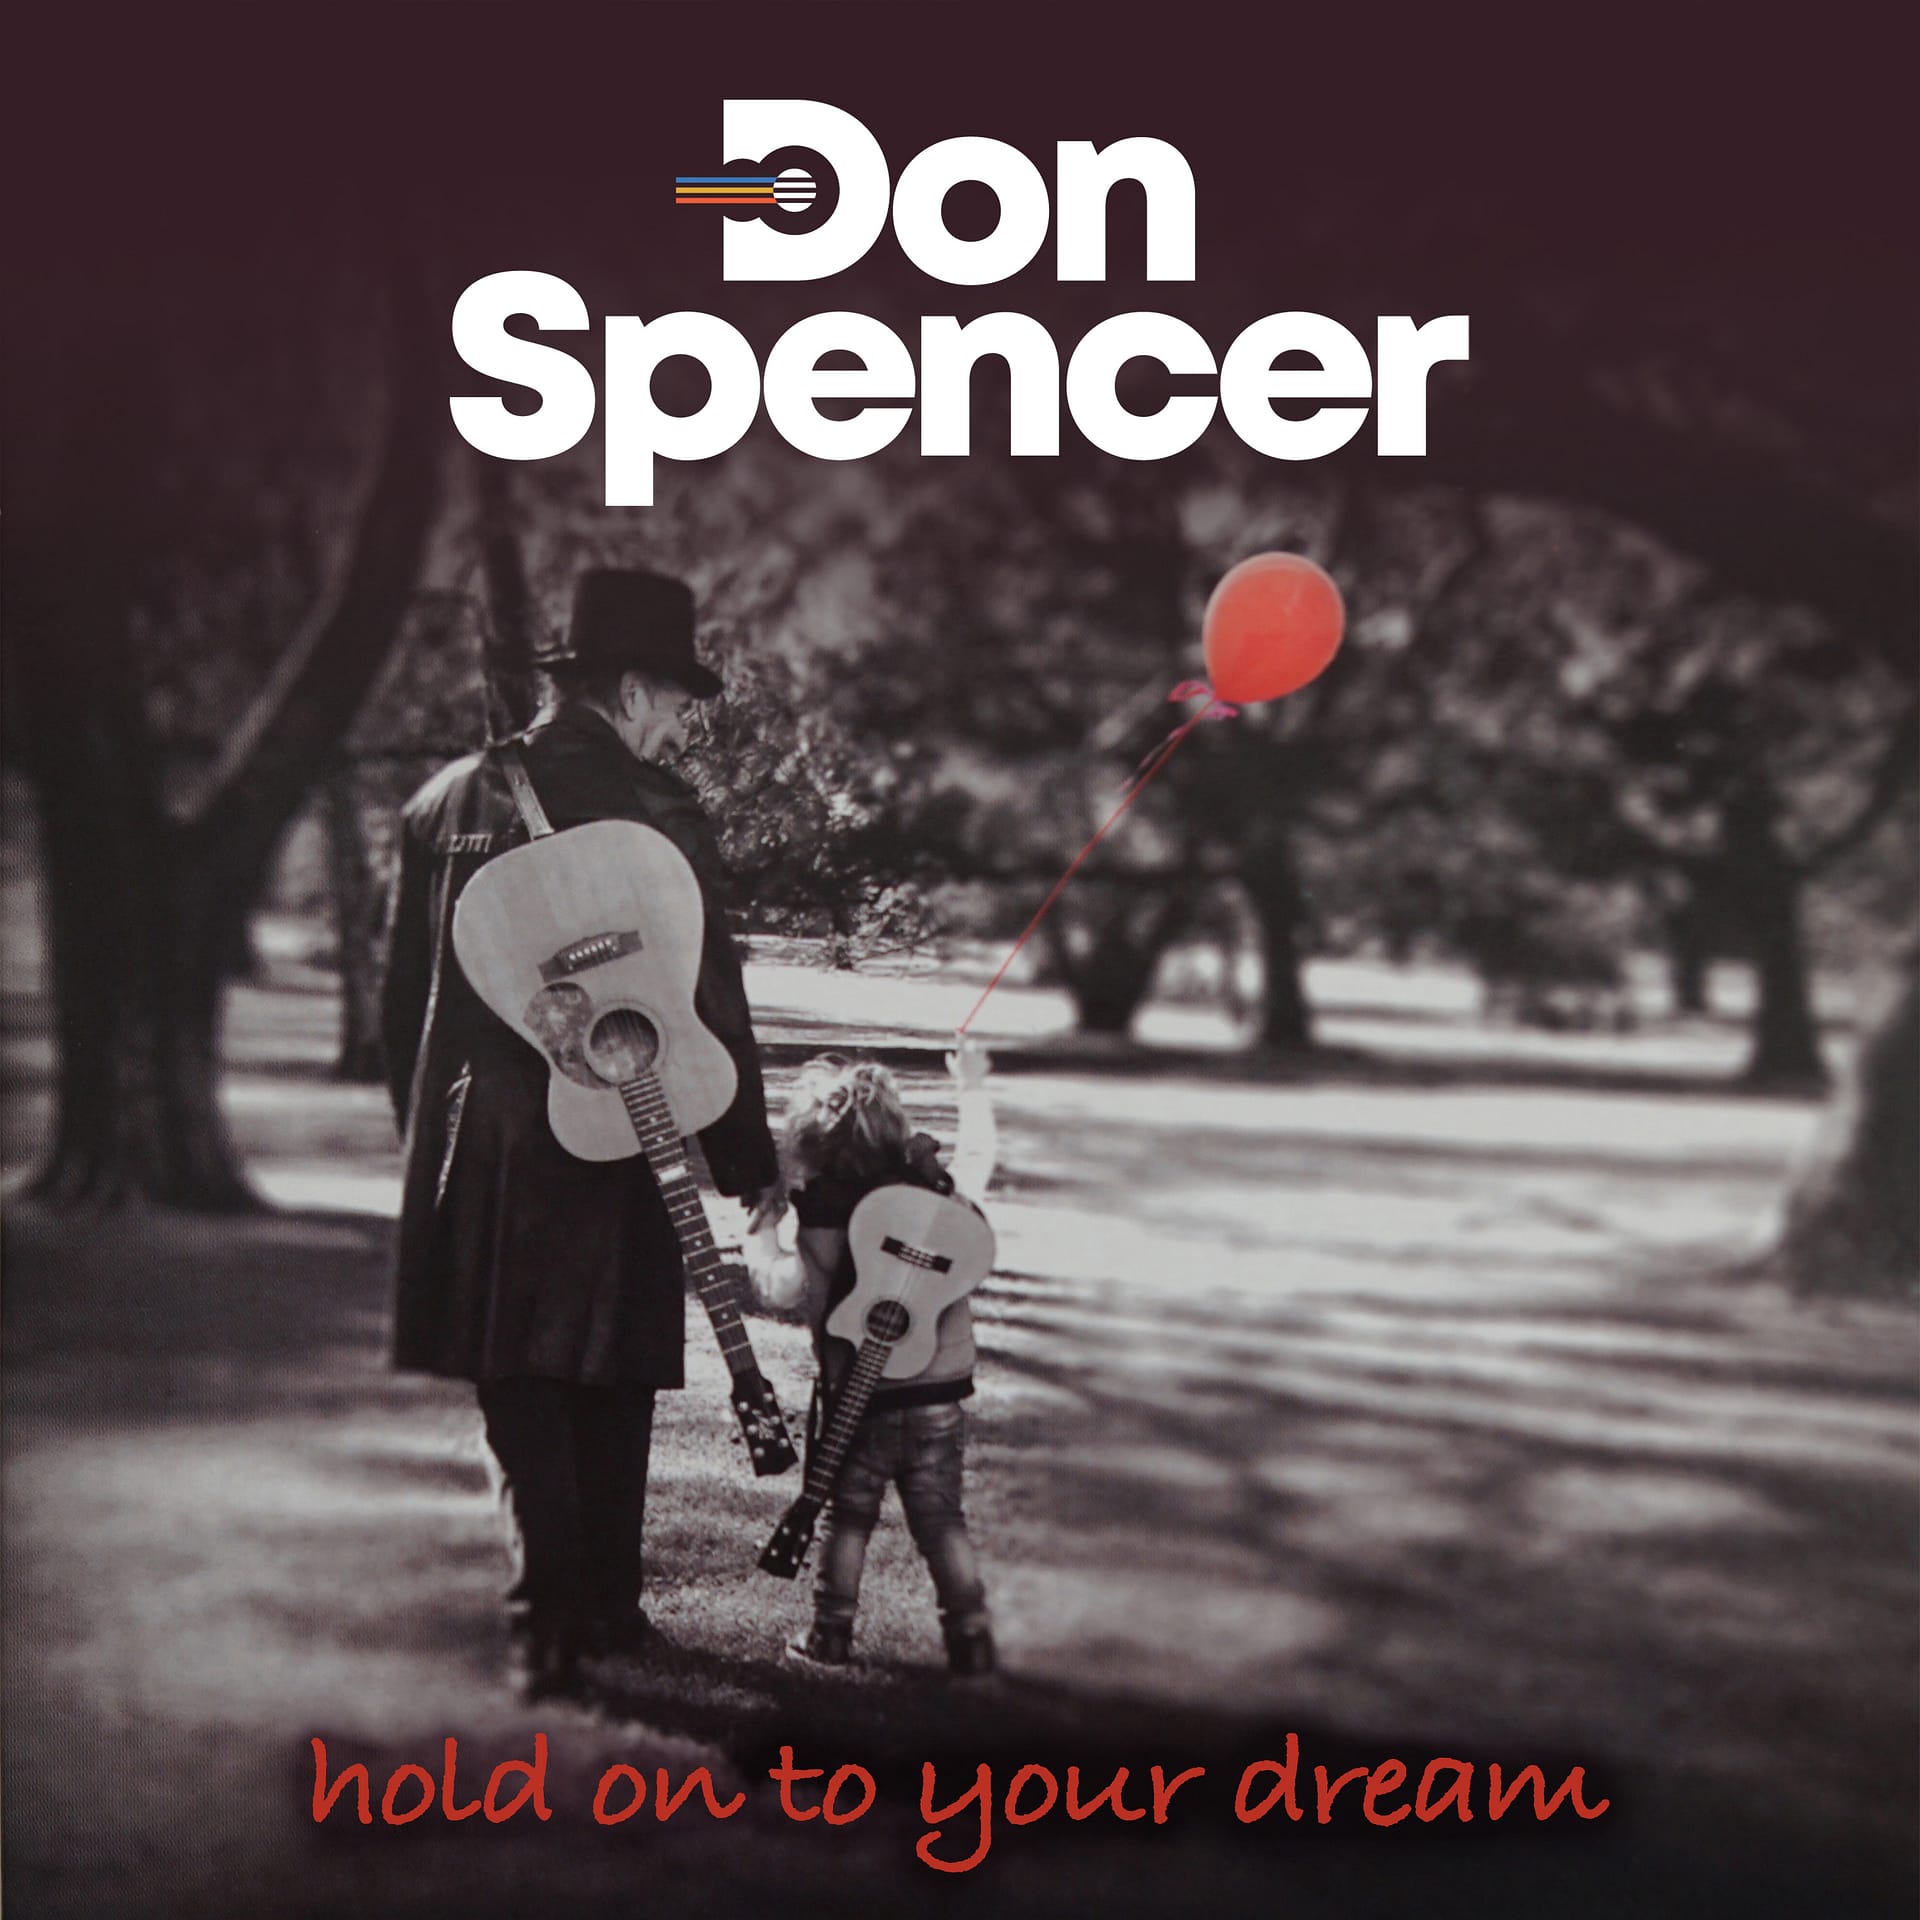 DON SPENCER Releases New Single ‘Hold On To Your Dream’